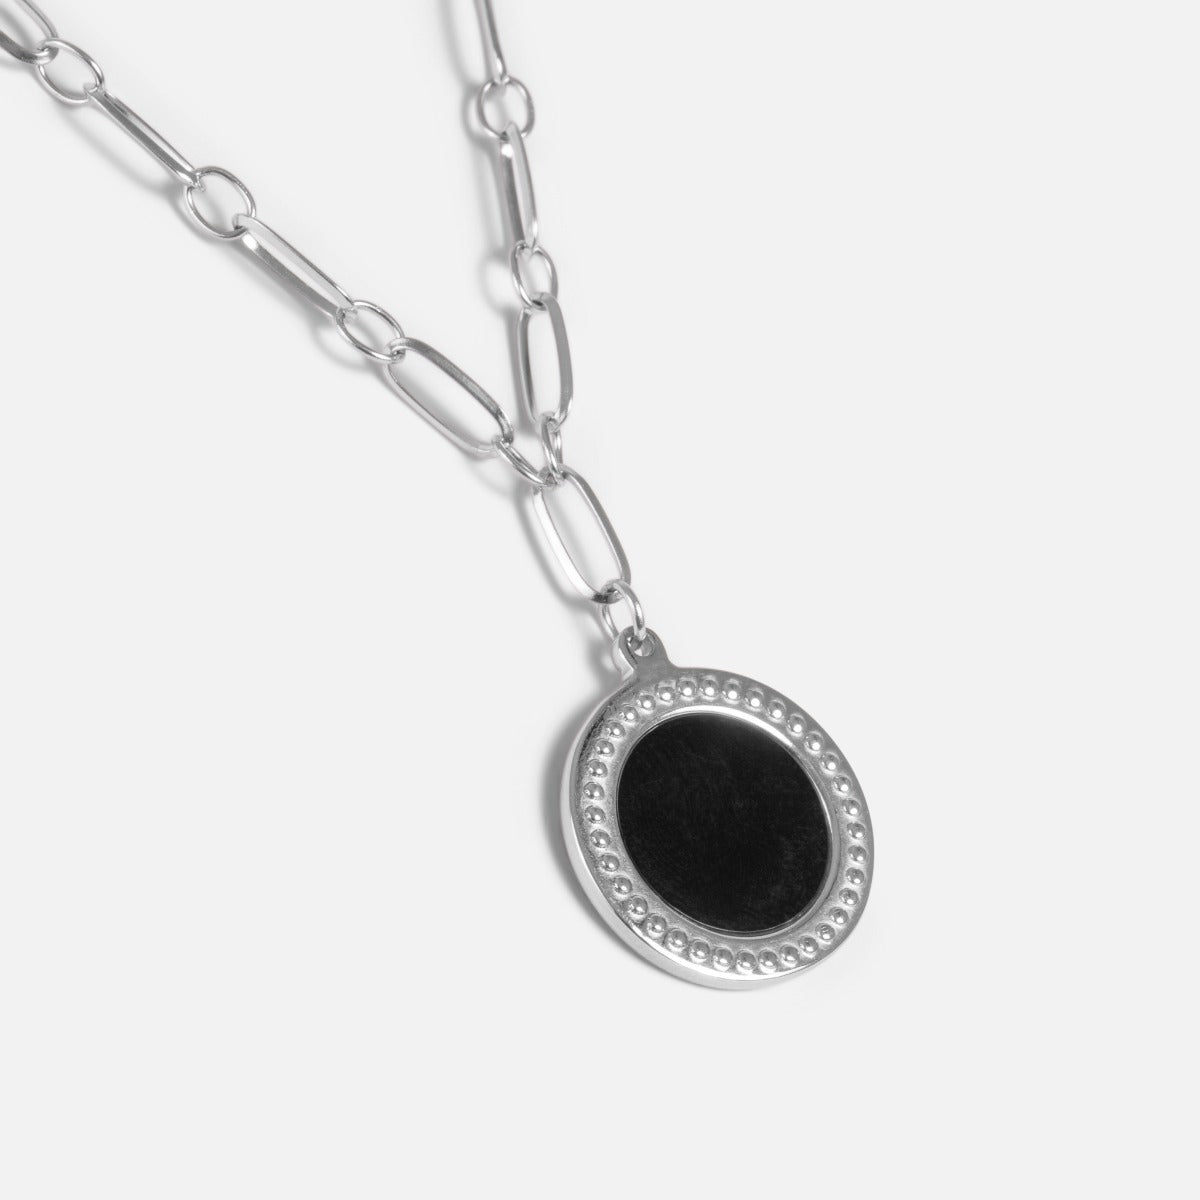 Long silver stainless steel necklace with large links and black round charm and textured outline